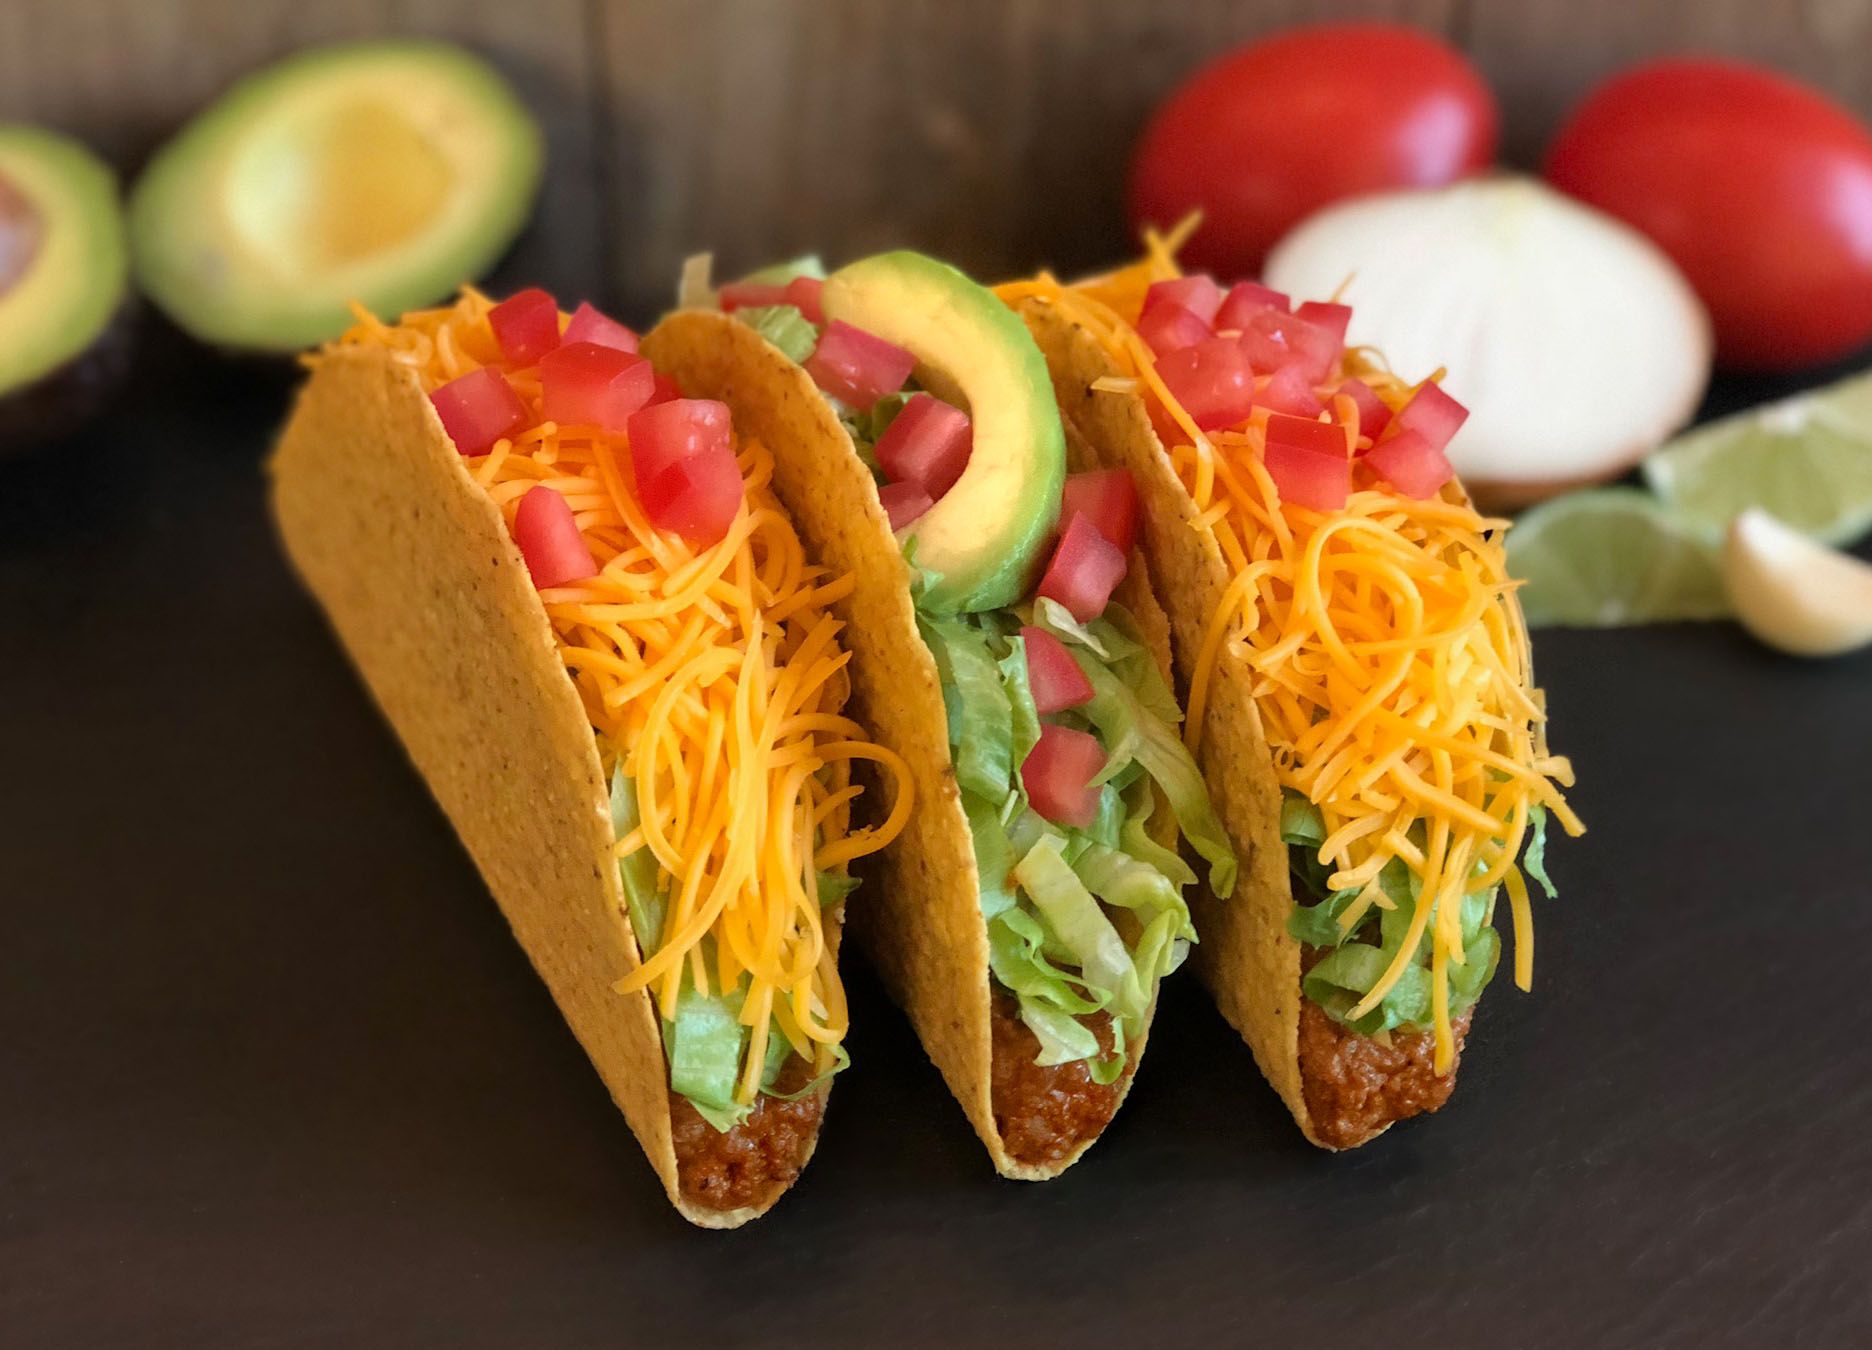 Score 10 Days of Deals with the New Del Yeah! Rewards App Beginning September 25 at Del Taco